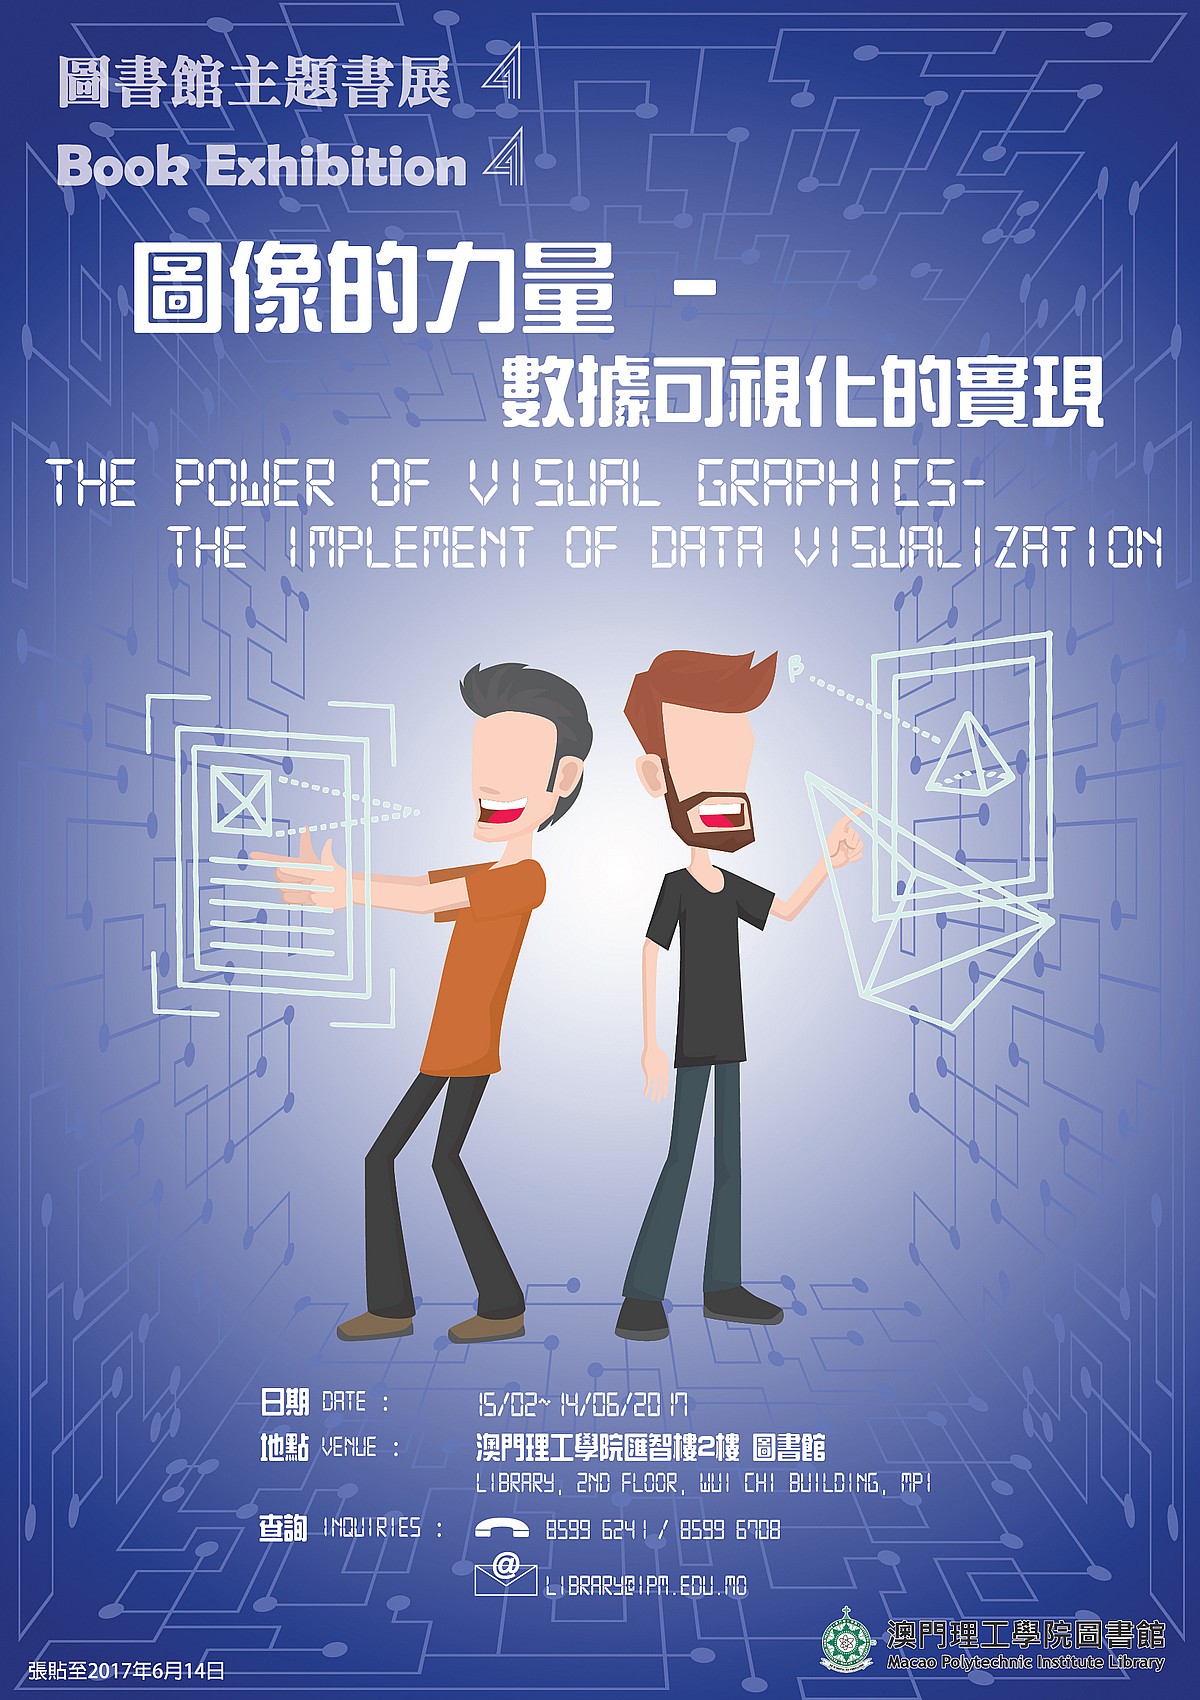 LIBRARY BOOK EXHIBITION 4 - The Power of Visual Graphics: The Implement of Data Visualization